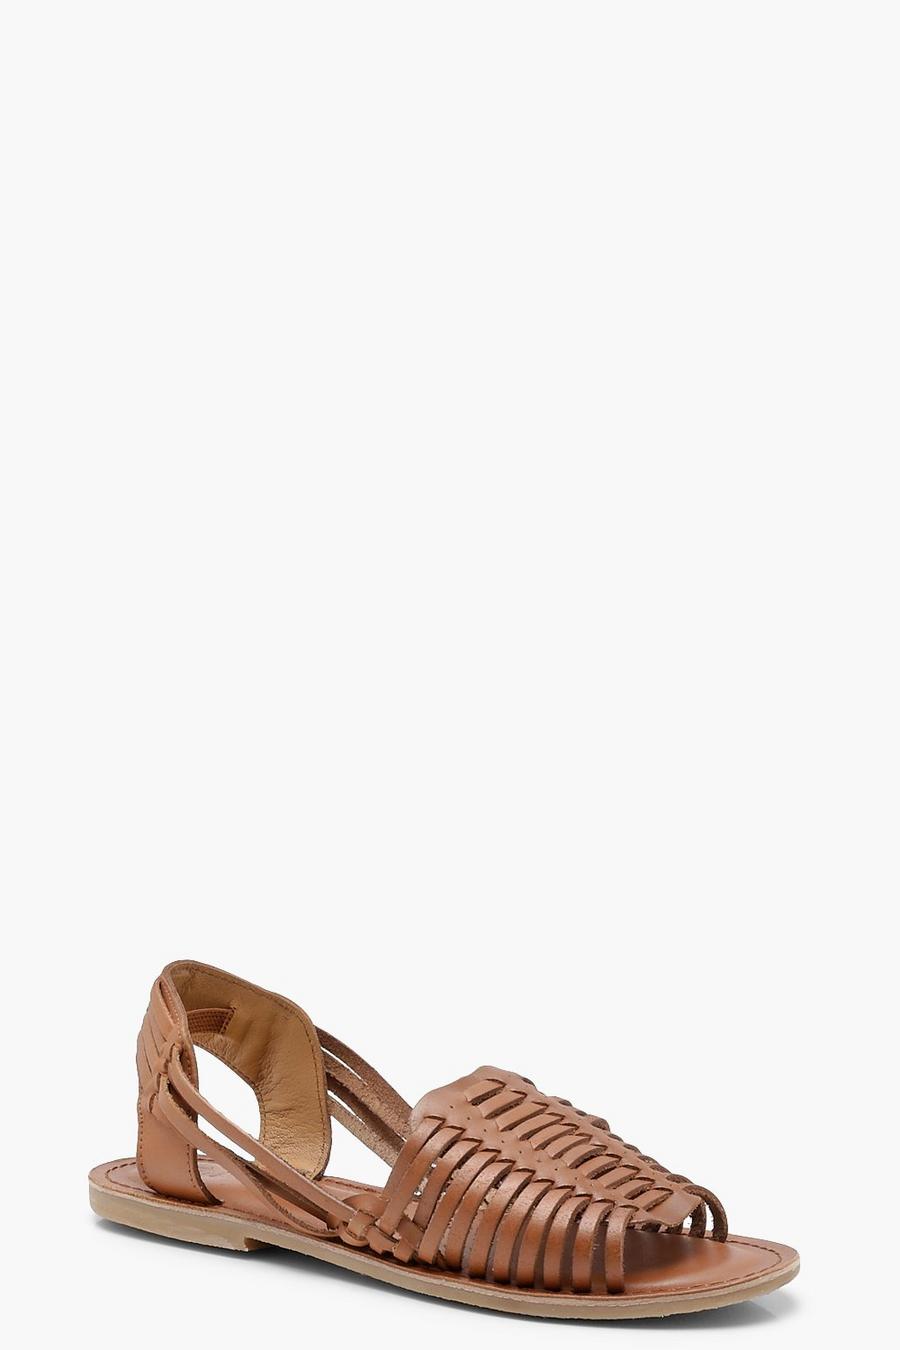 Tan Leather Woven Sandals image number 1